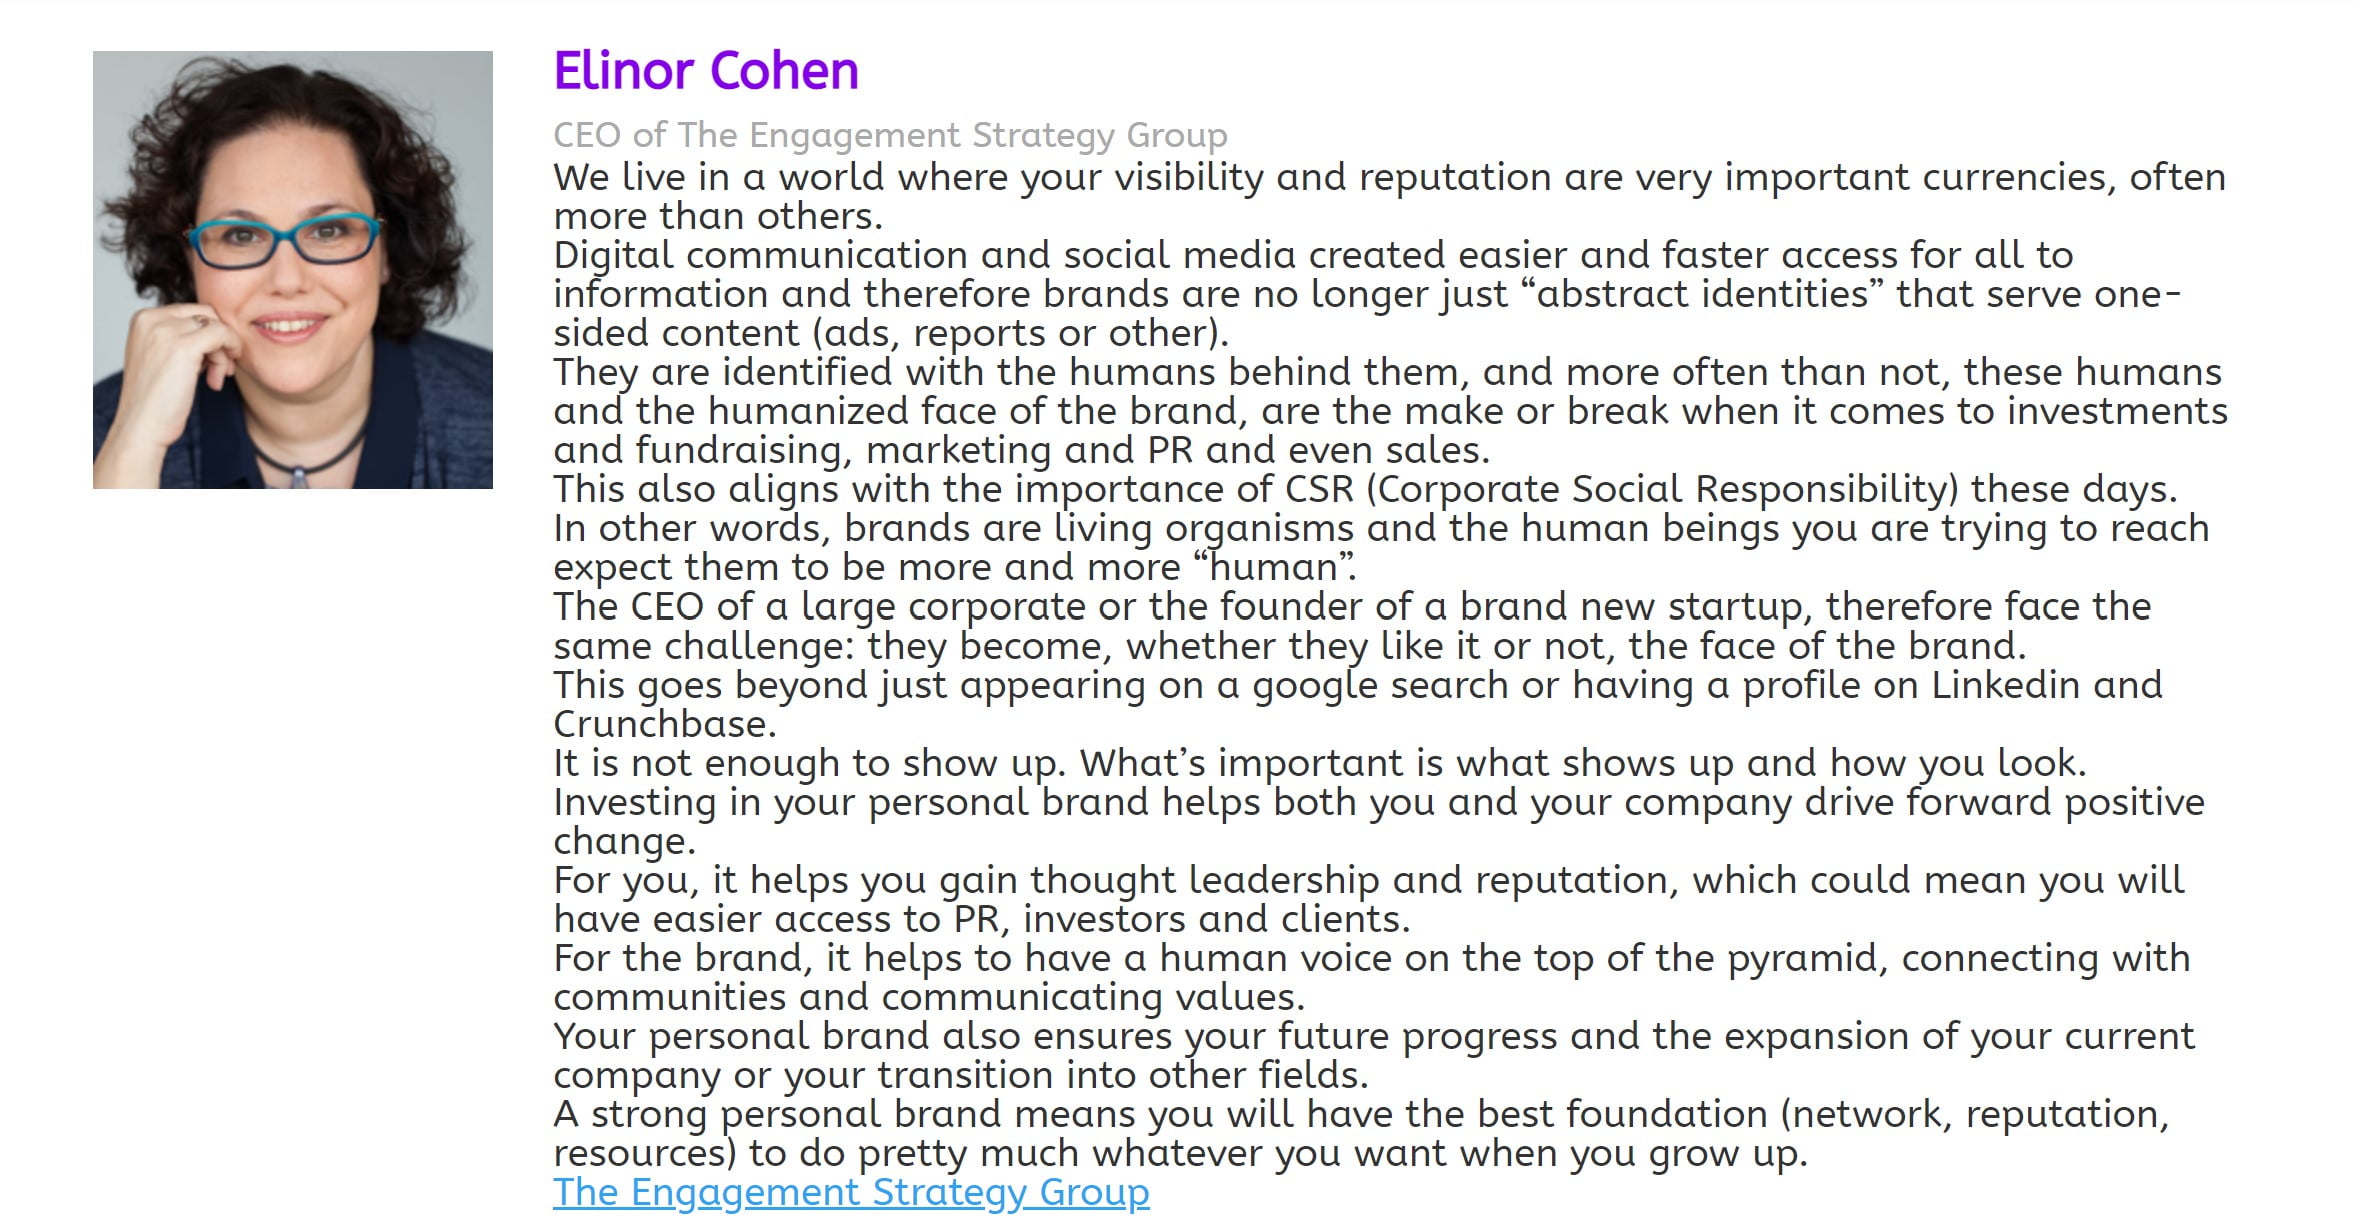 Elinor Cohen on what "personal brand" means